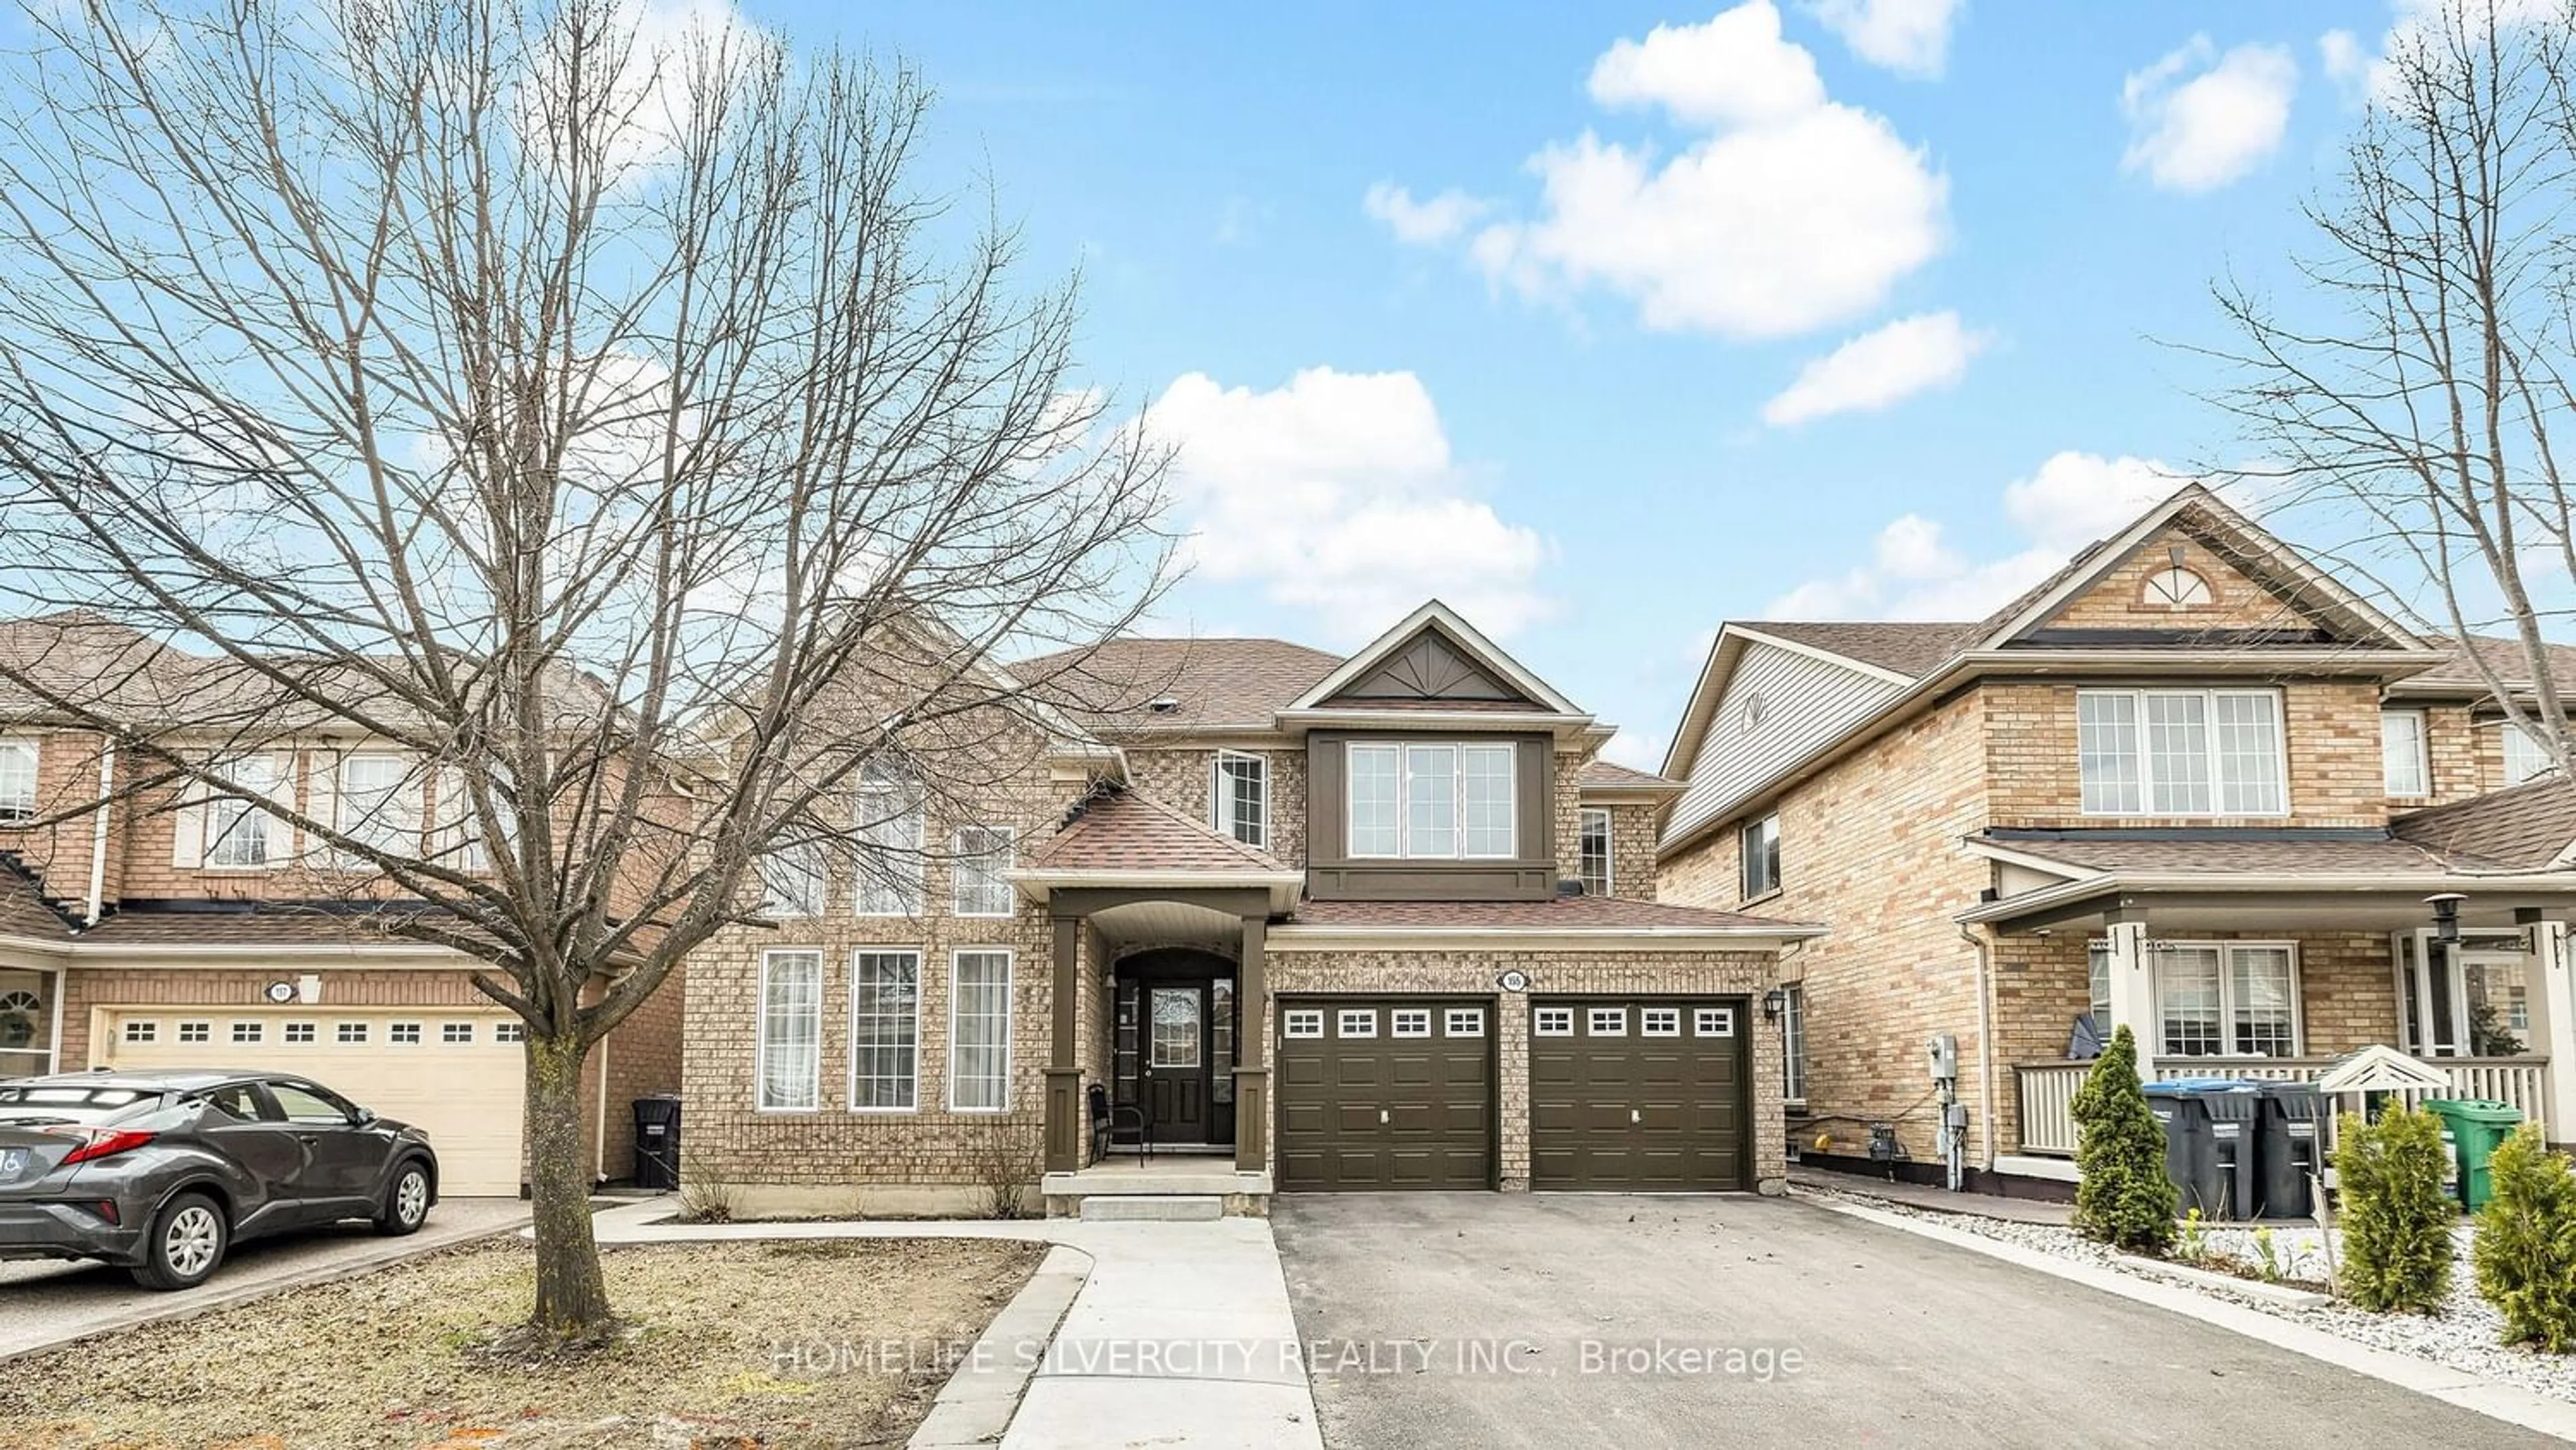 Frontside or backside of a home for 155 Whitwell Dr, Brampton Ontario L6P 1L1